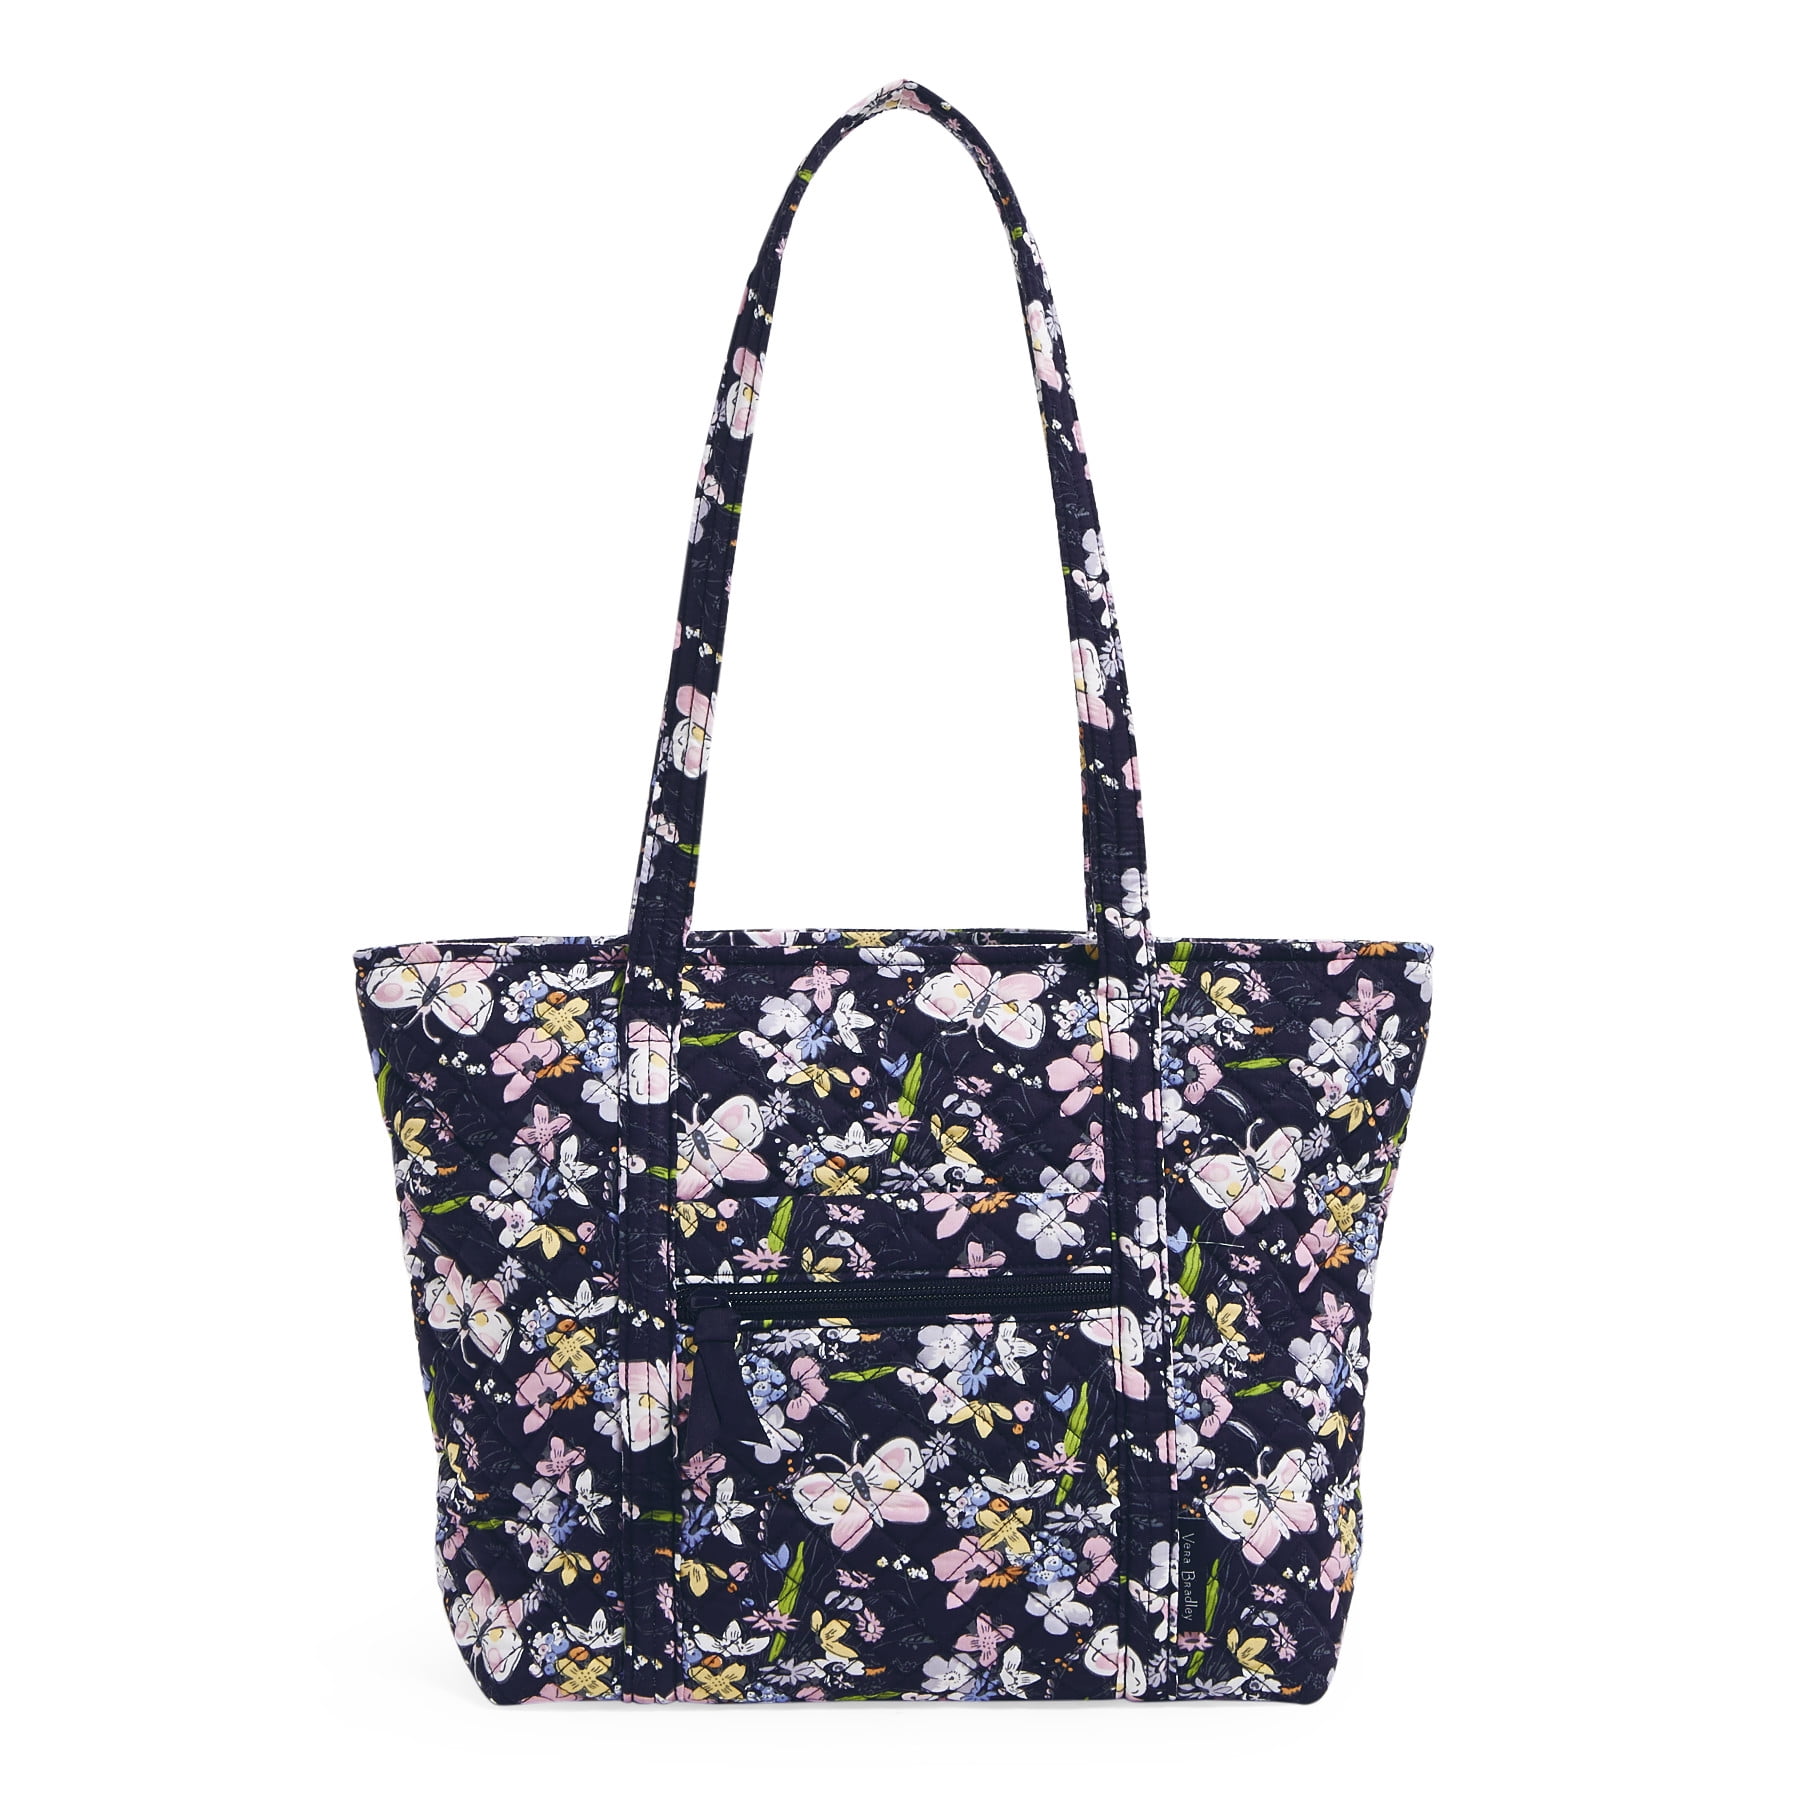 Vera Bradley Women's Recycled Cotton Utility Tote Bag Rain Forest 